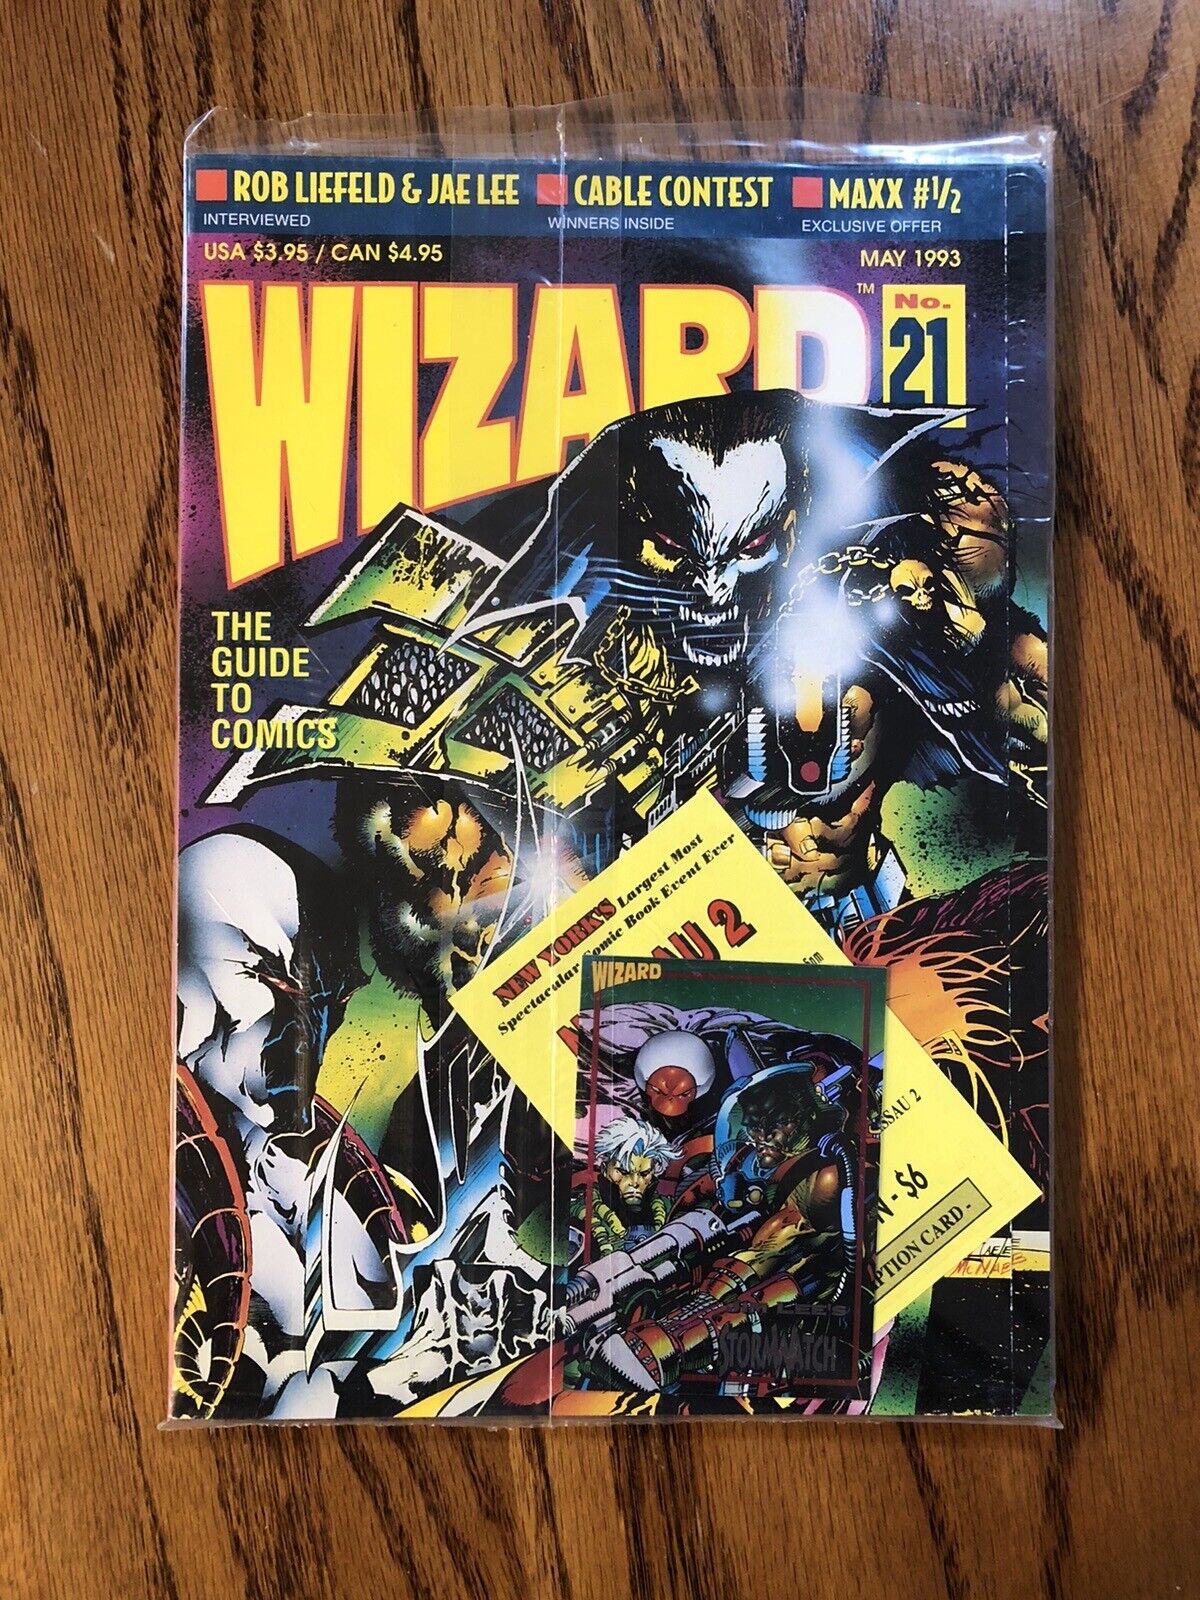 Wizard #21 May 1993 SEALED Polybag Comic Magazine w/ Card Bagged Jim Lee Liefeld